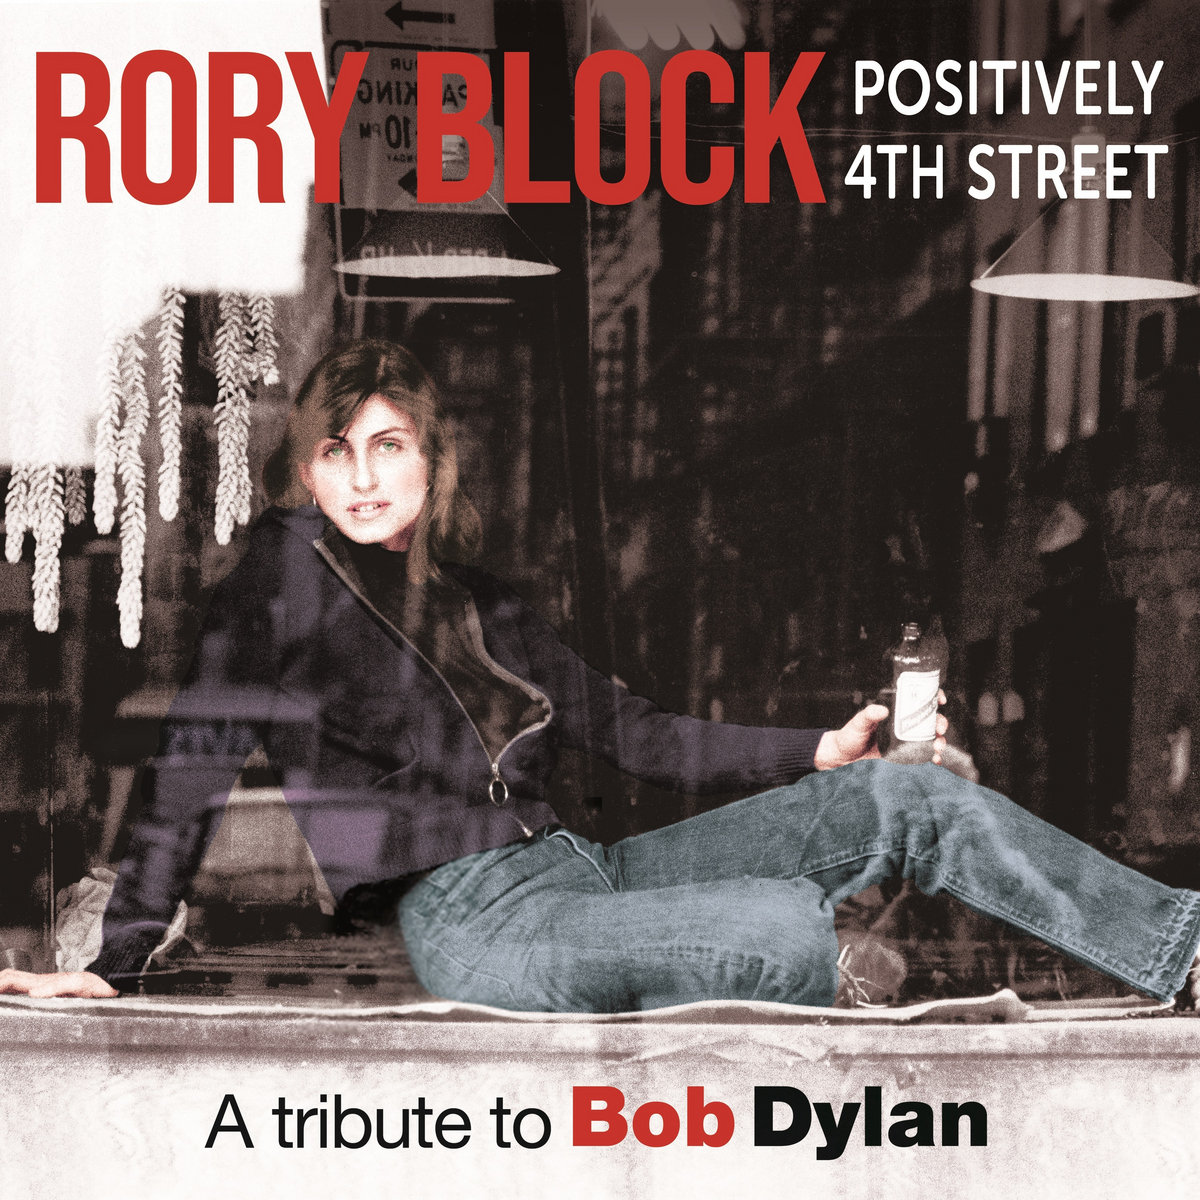 Rory Block celebrates Dylan, revisits roots.